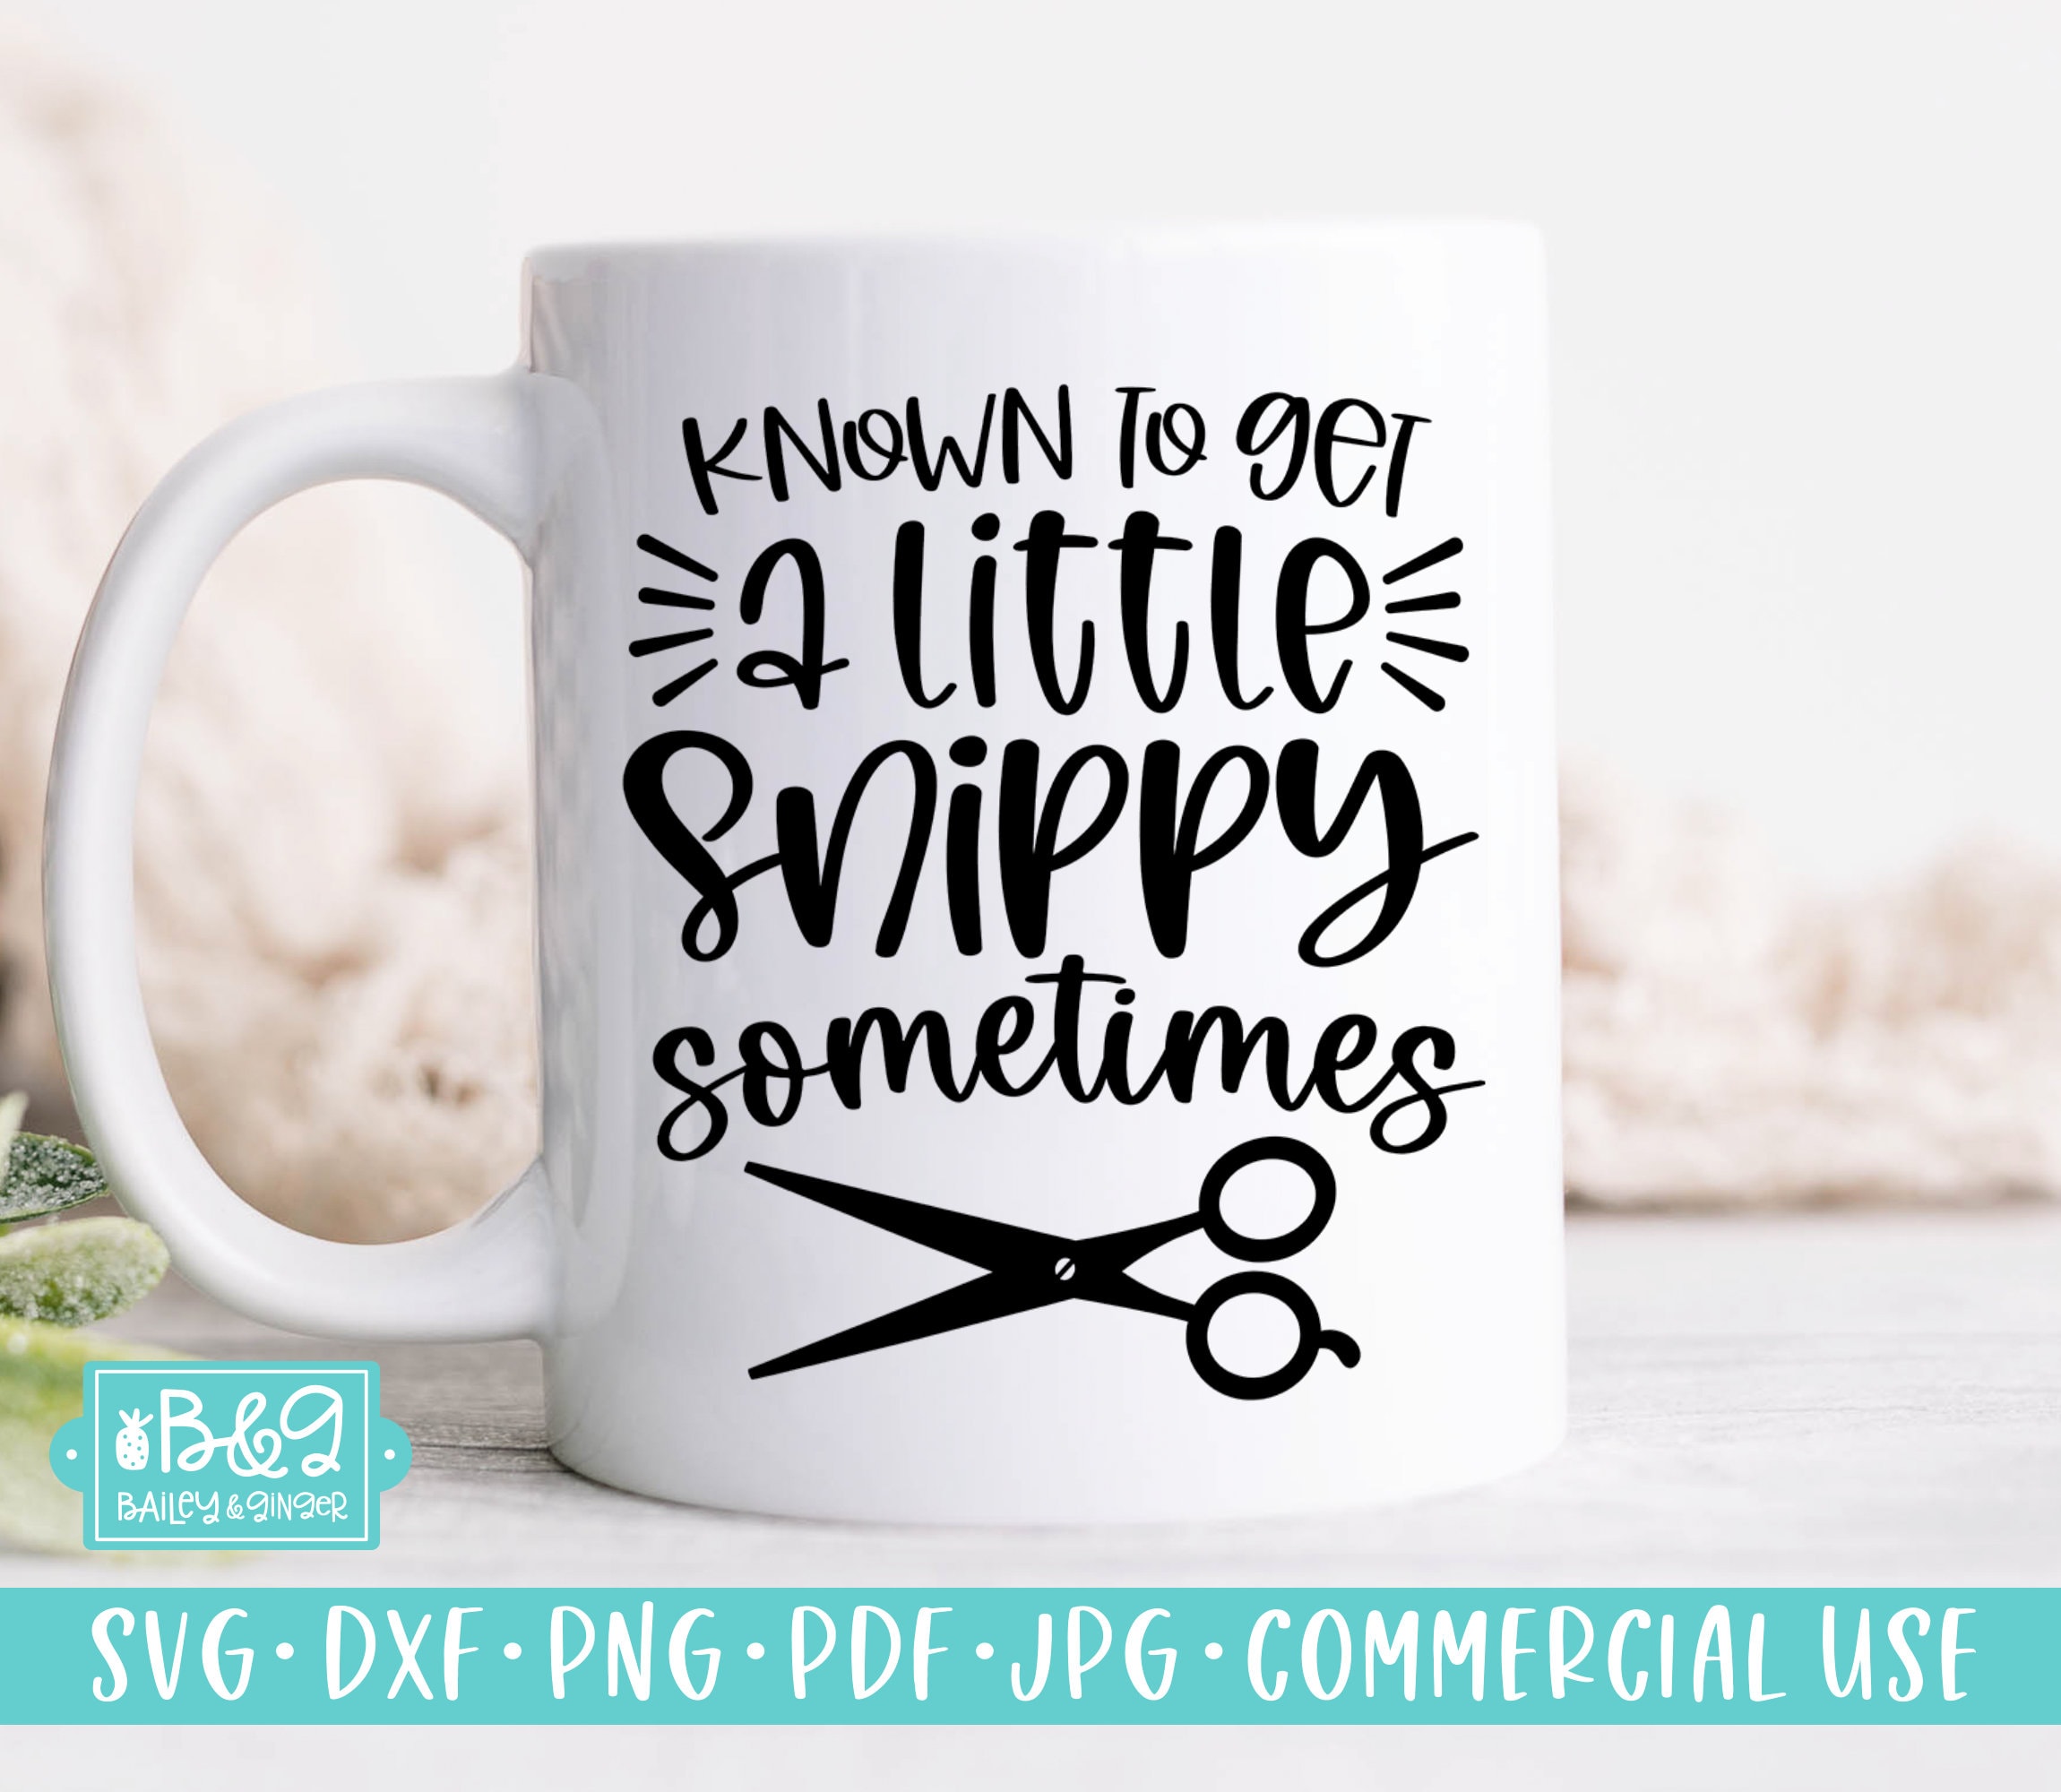 Cricut Pens Archives - Snippy Sisters